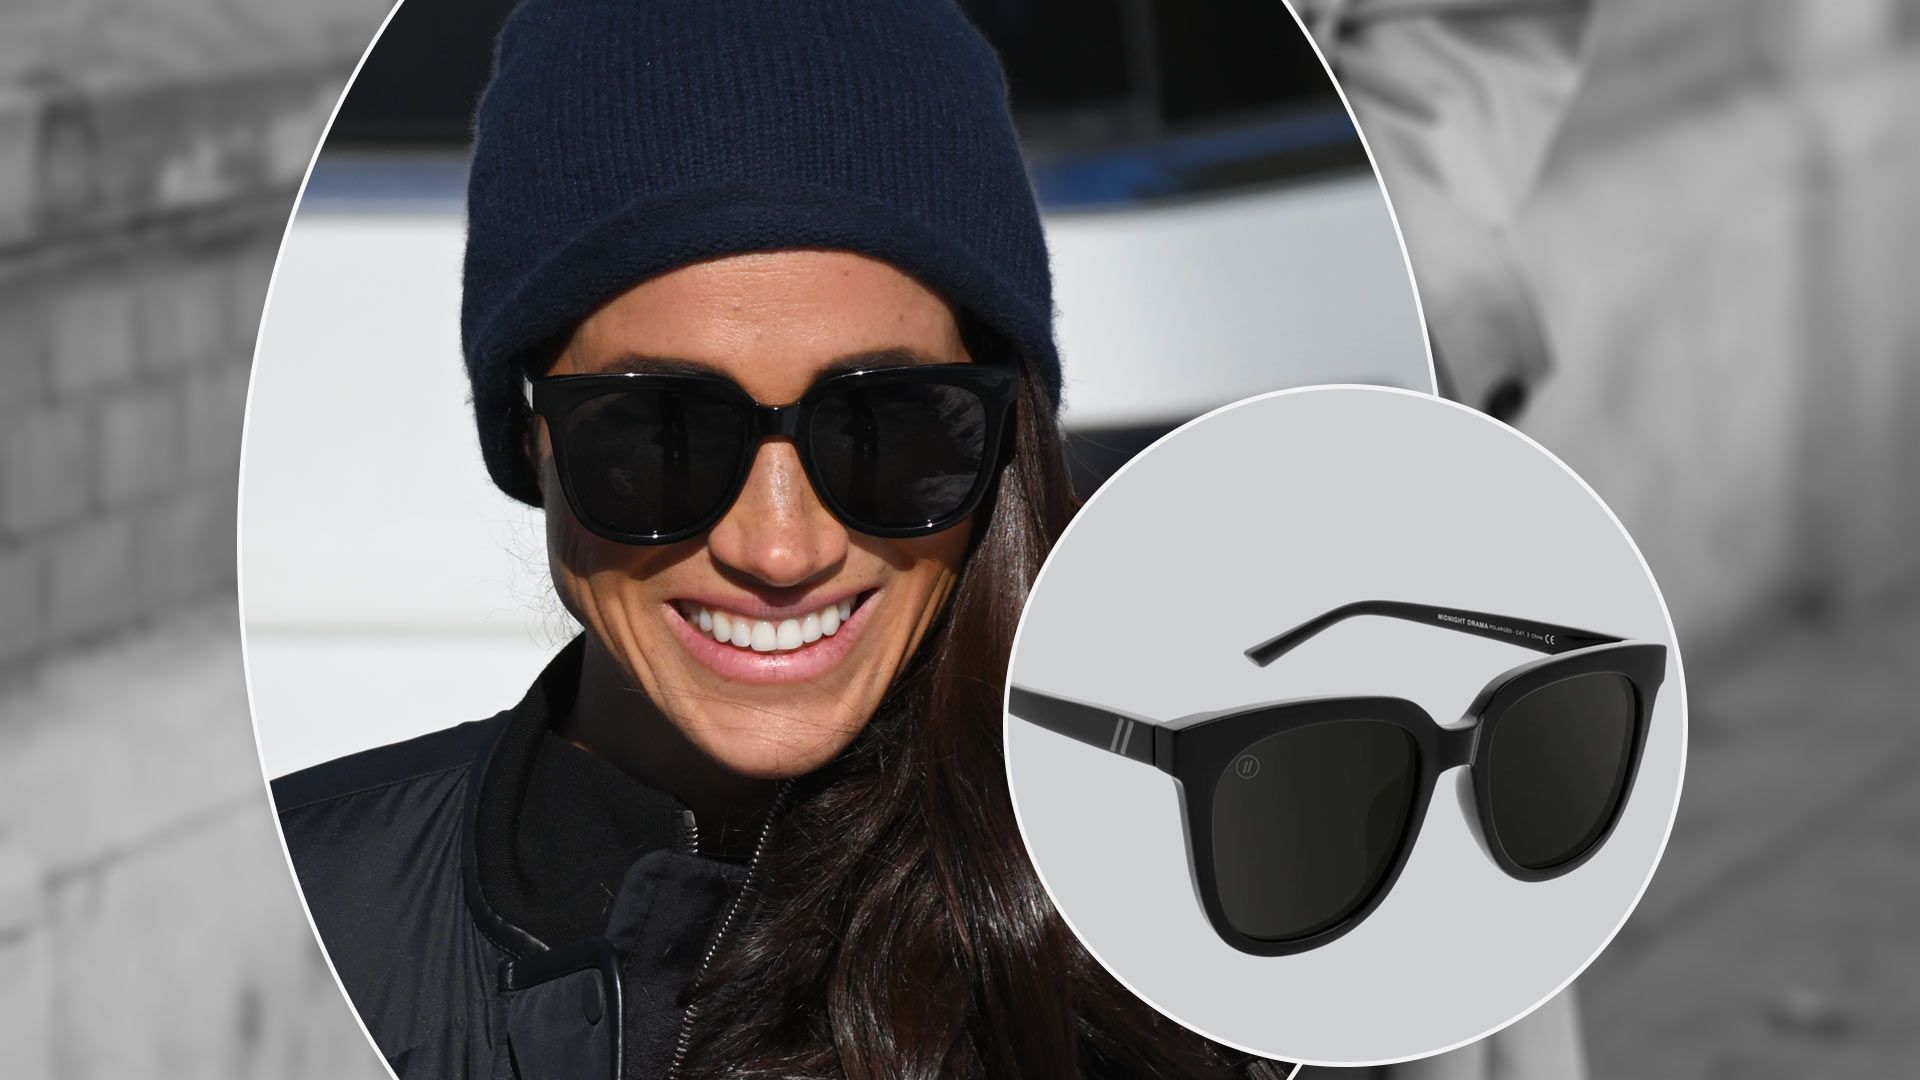 Meghan Markle's new Blenders sunglasses are back in stock & they're such a bargain